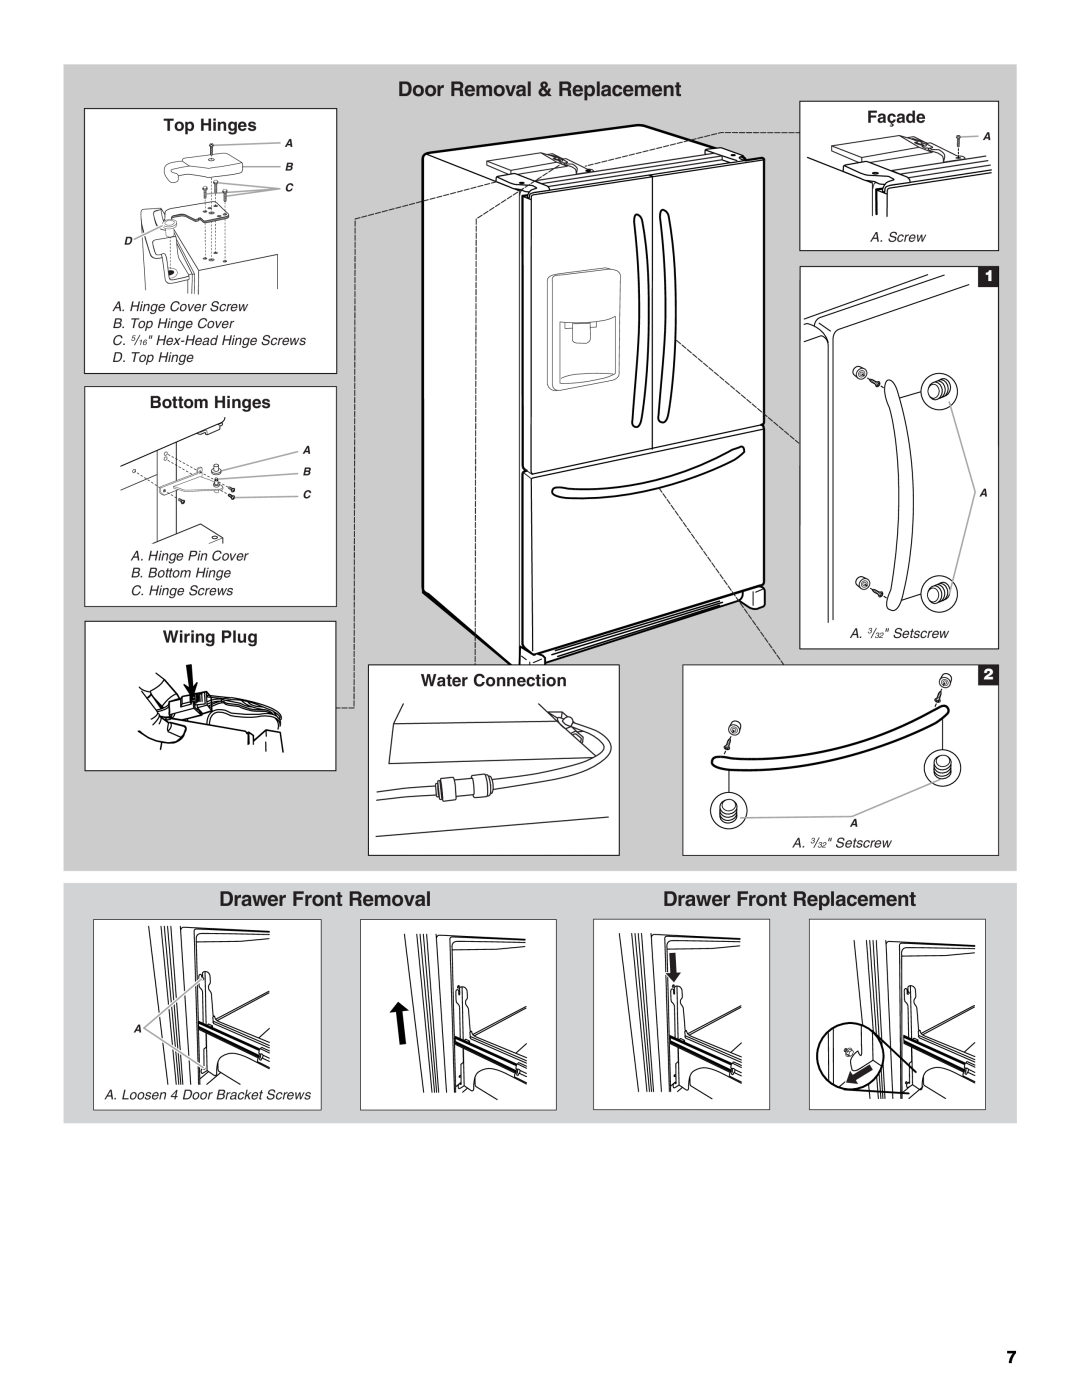 Maytag MFT2771WEM Door Removal & Replacement, Drawer Front Removal, Drawer Front Replacement, Top Hinges, Bottom Hinges 